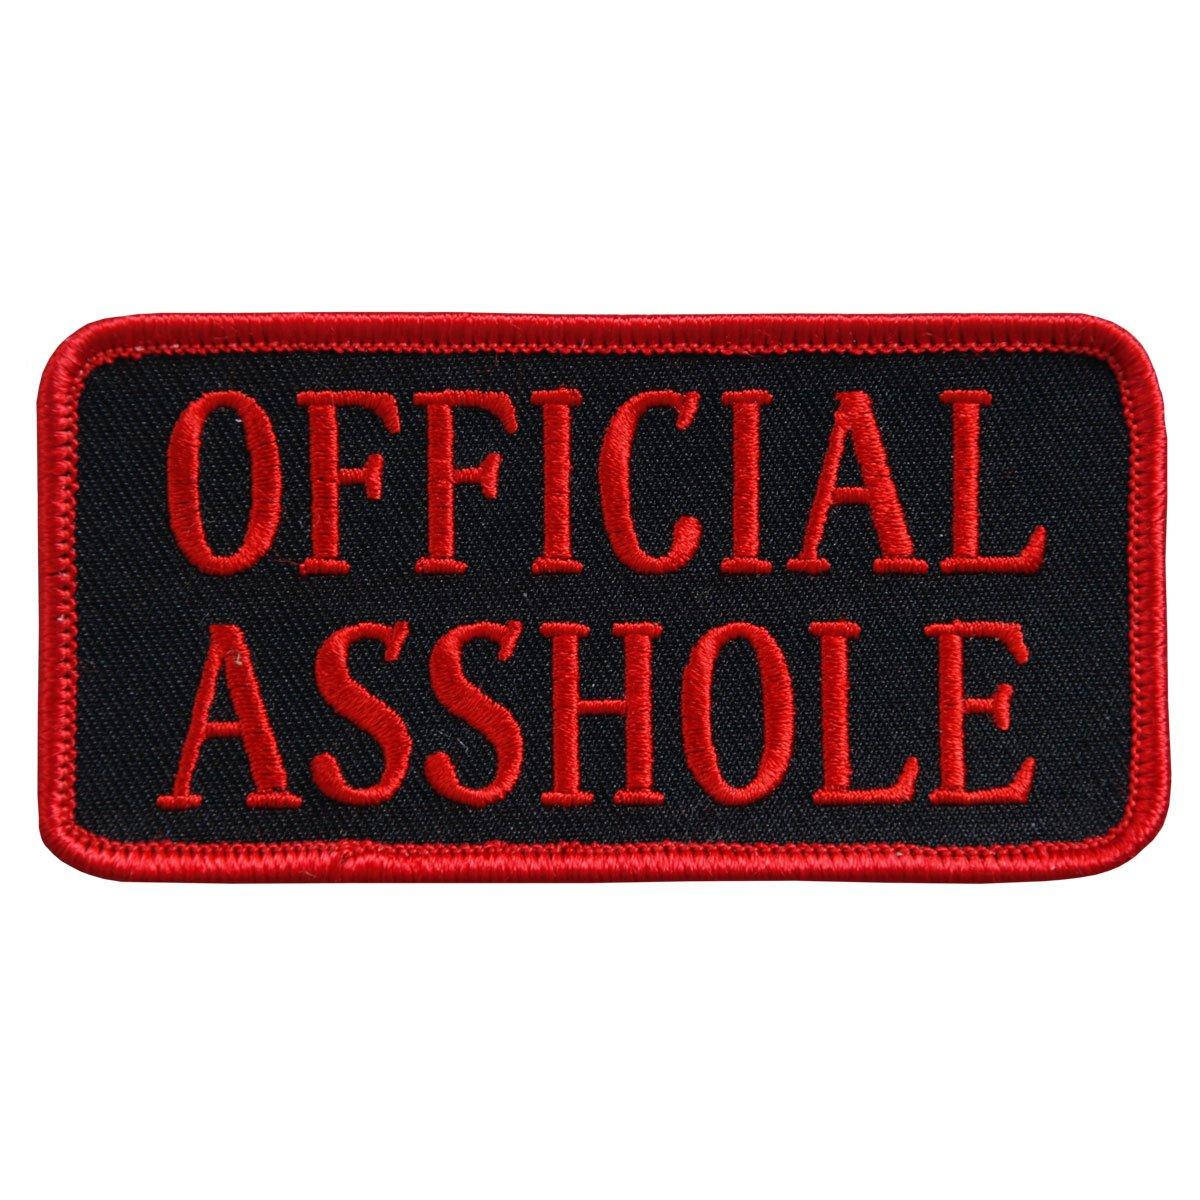 Hot Leathers Official Asshole 4" X 2" Patch - American Legend Rider